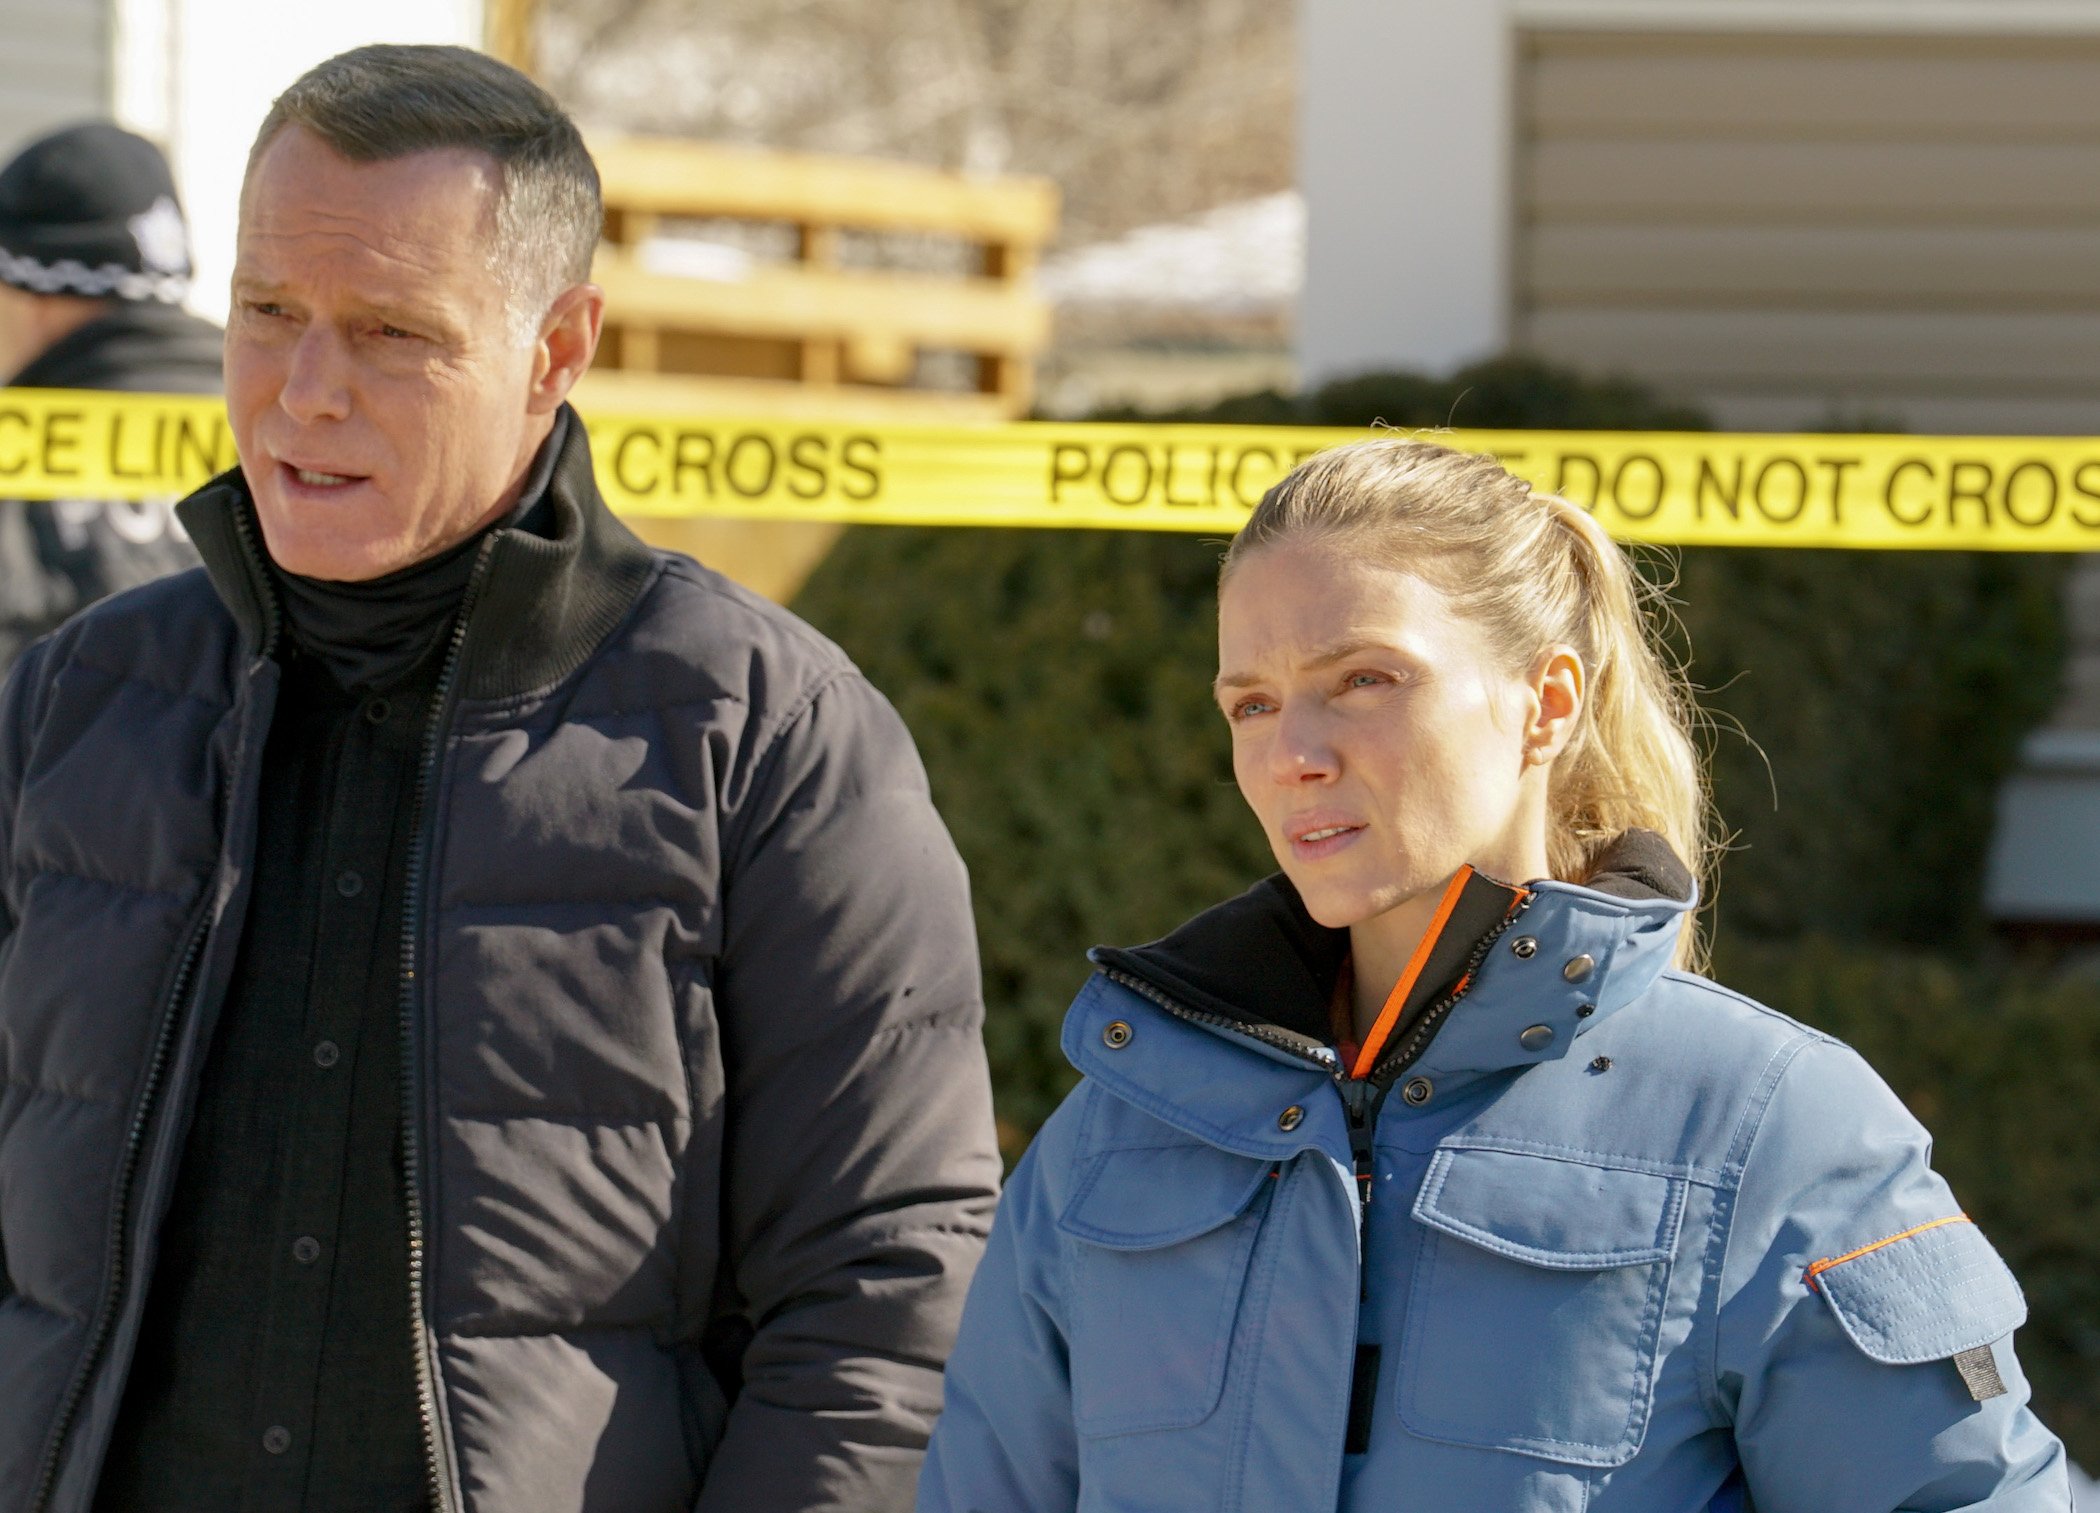 Hank Voight and Hailey Upton, two stars of 'Chicago P.D.' Season 9, standing next to each other in front of police tape